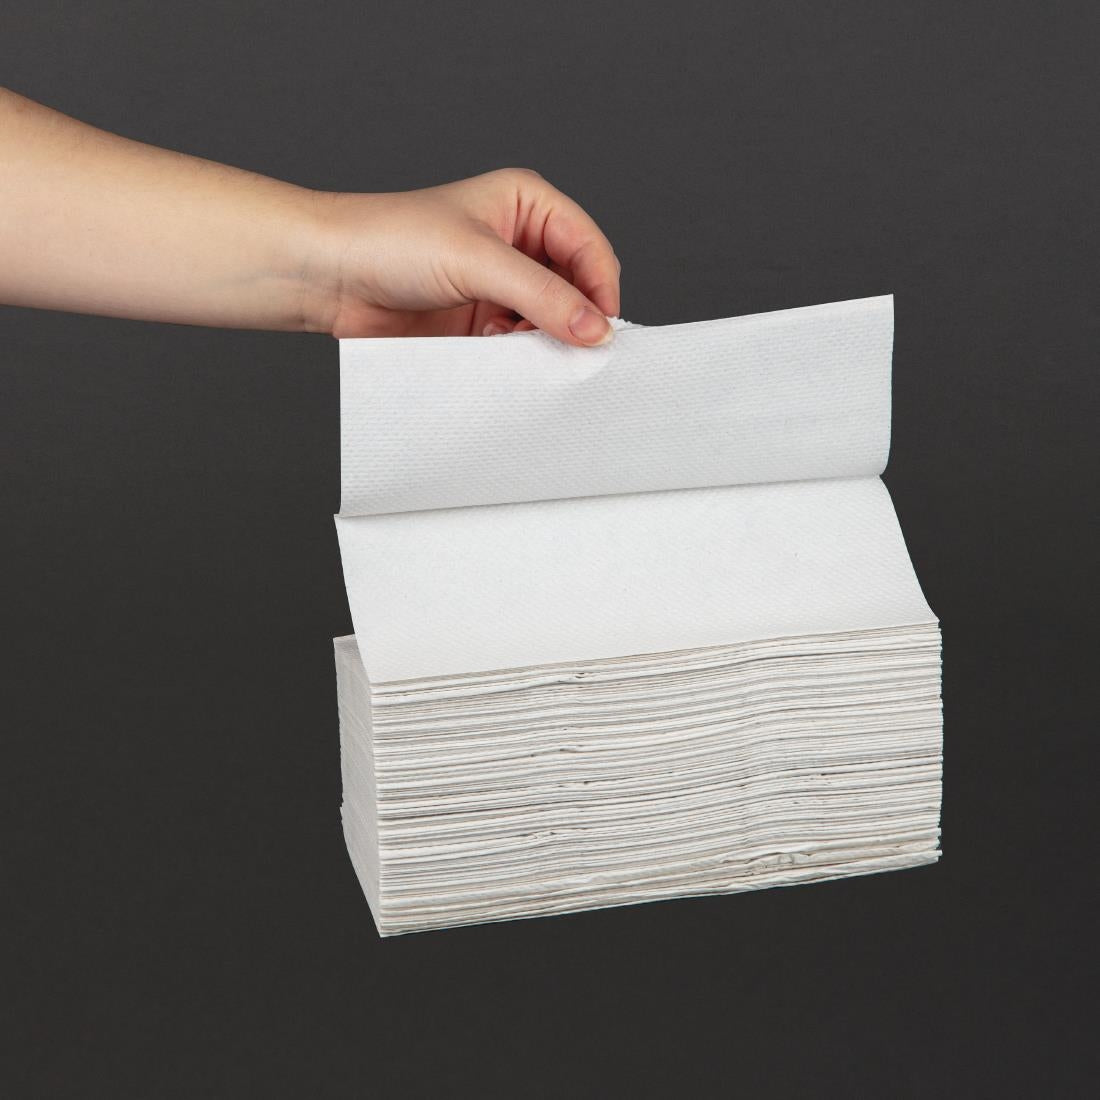 CF796 Jantex C Fold Paper Hand Towels White 2-Ply (Pack of 2355 sheets) JD Catering Equipment Solutions Ltd